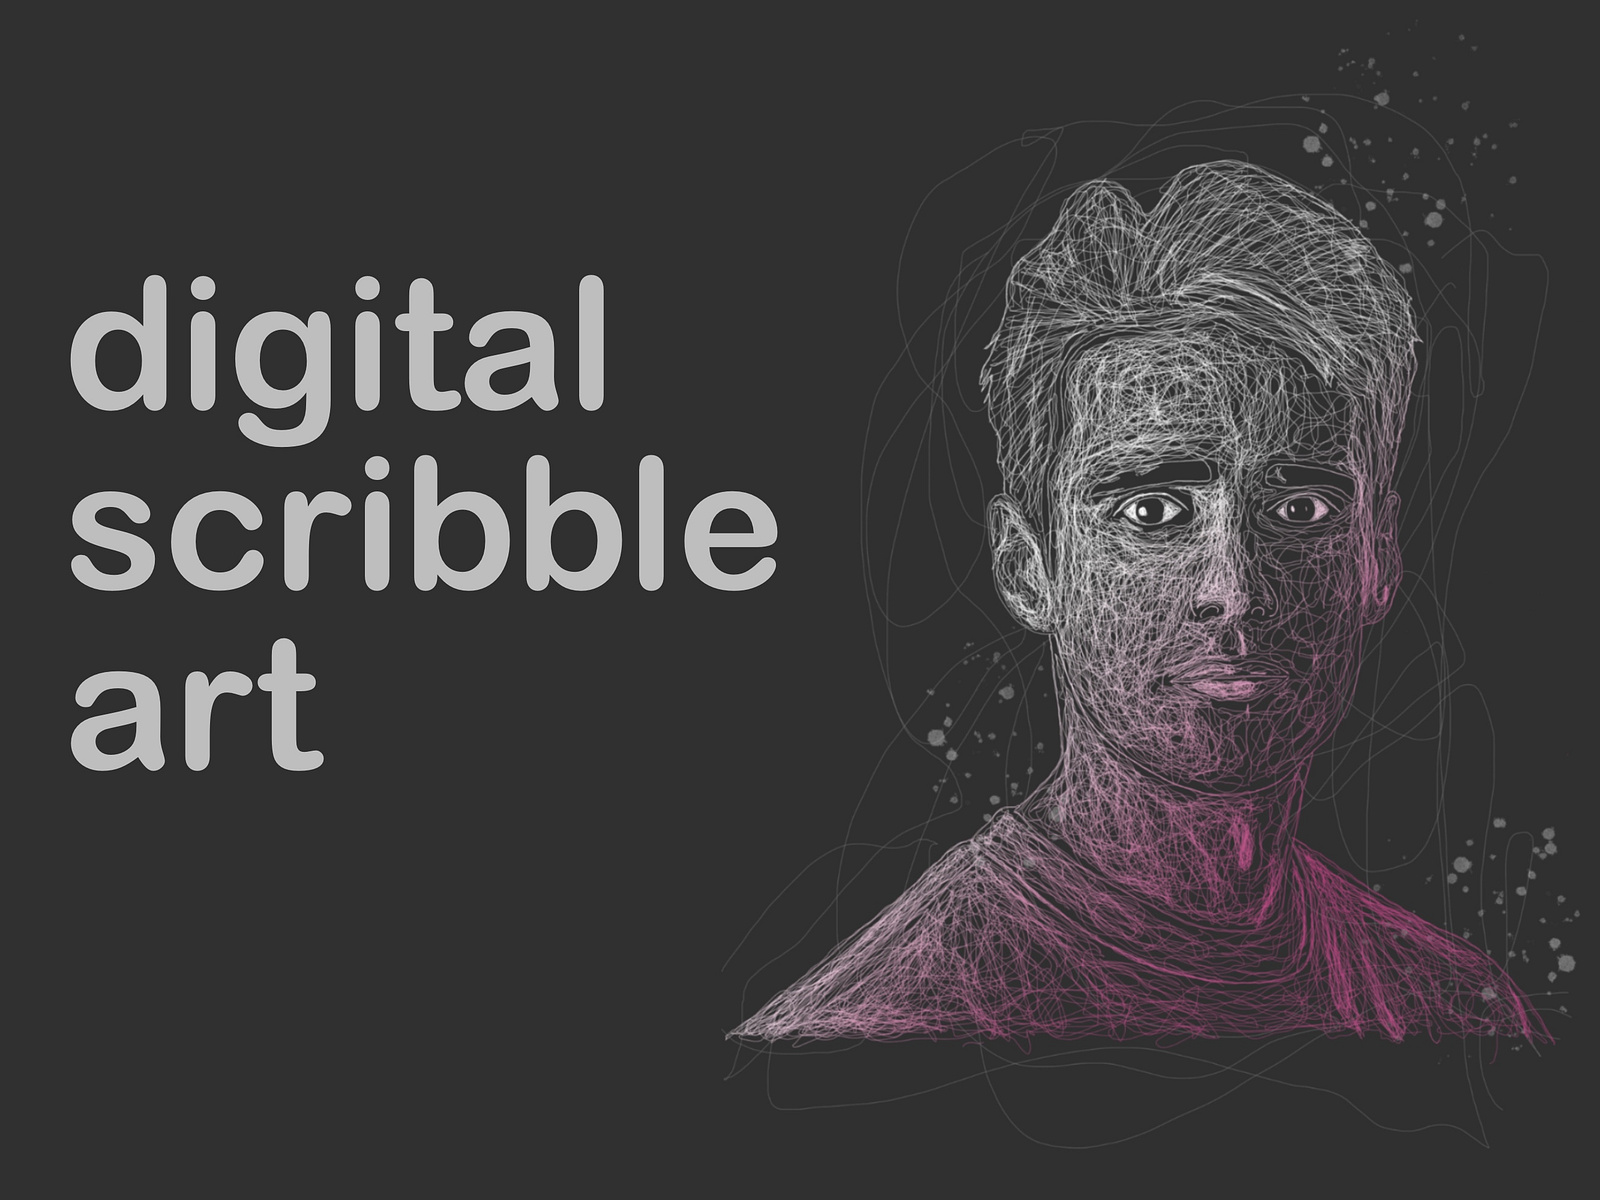 Scribble art drawing by Faishol Haq on Dribbble